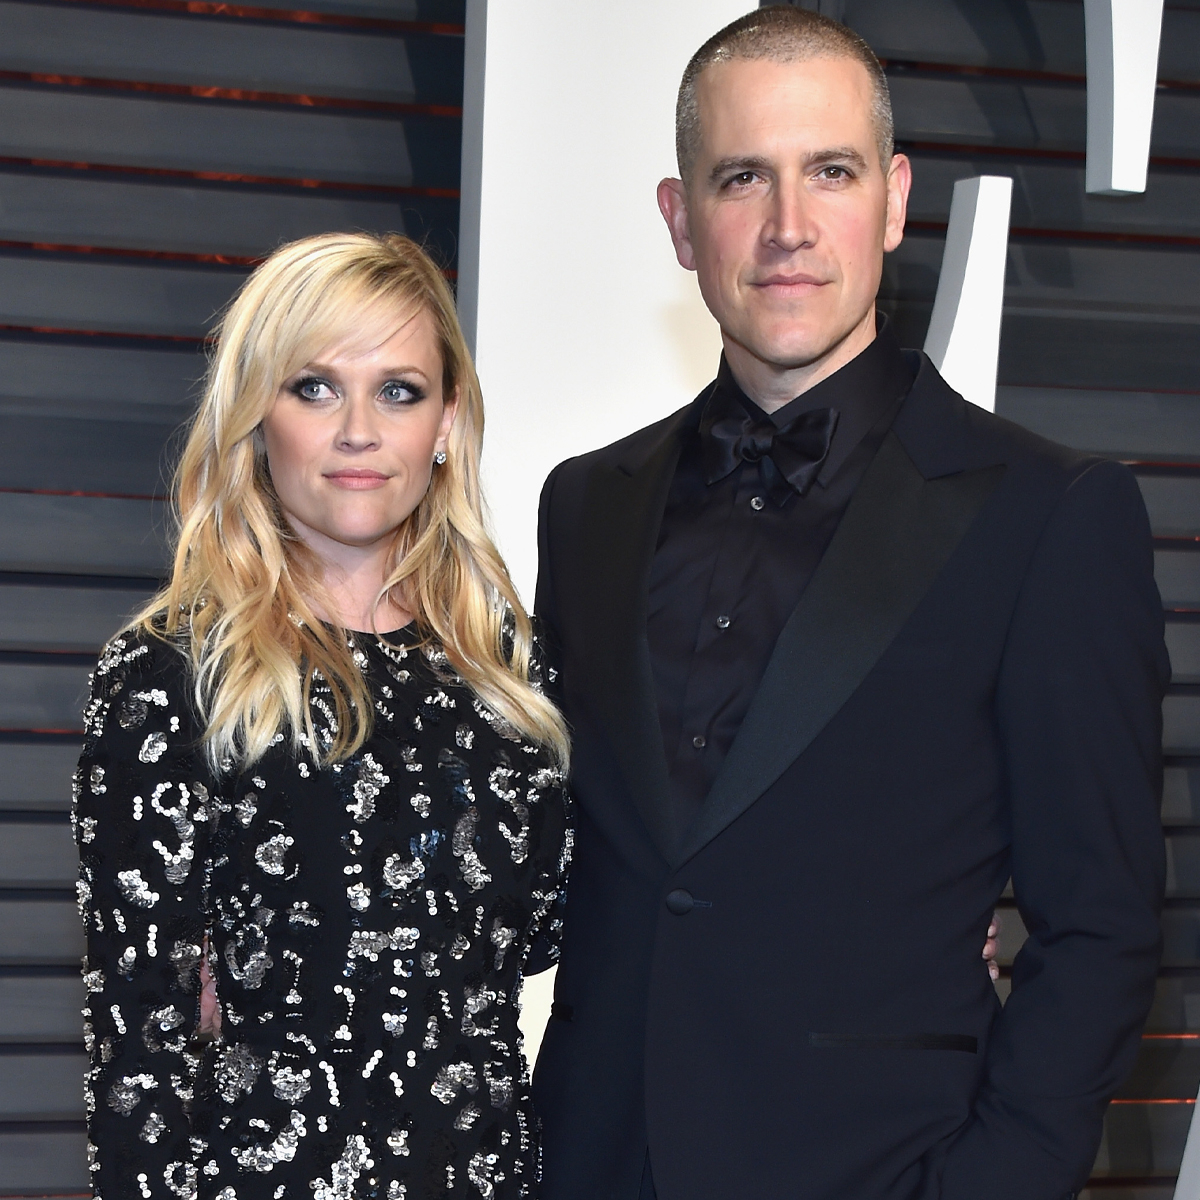 Reese Witherspoon divorcing Jim Toth